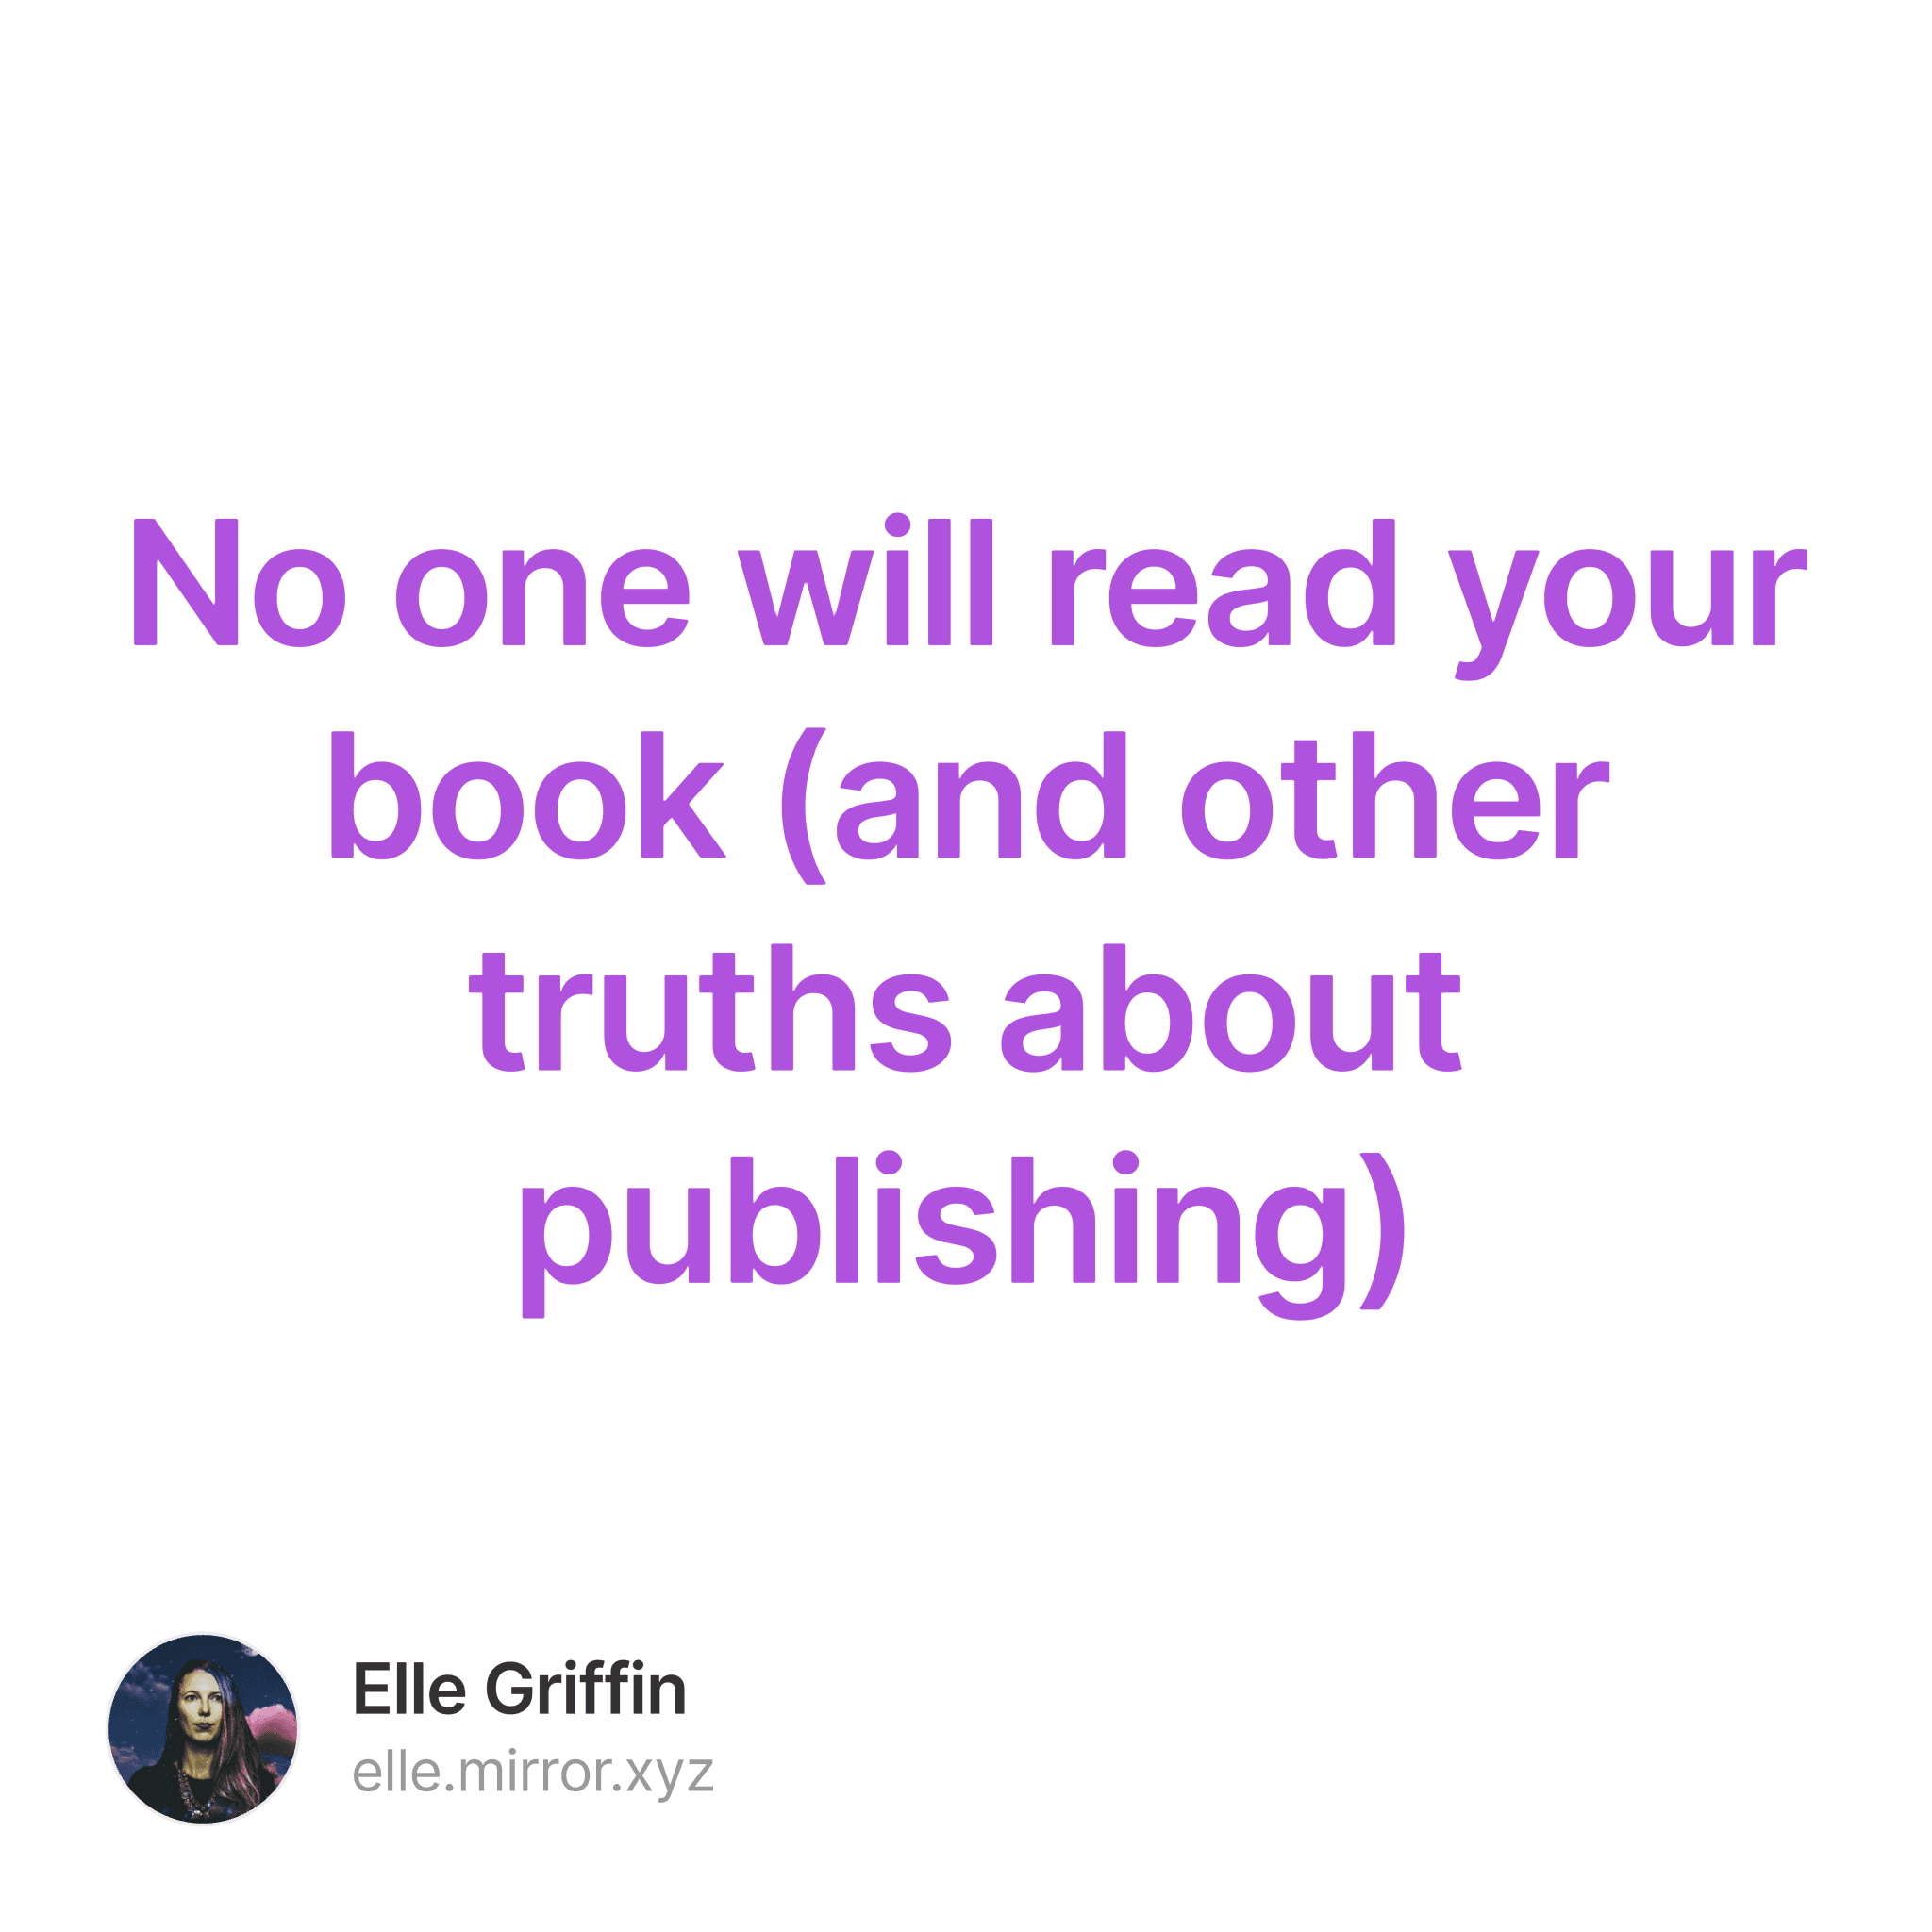 No one will read your book (and other truths about publishing) 4/100